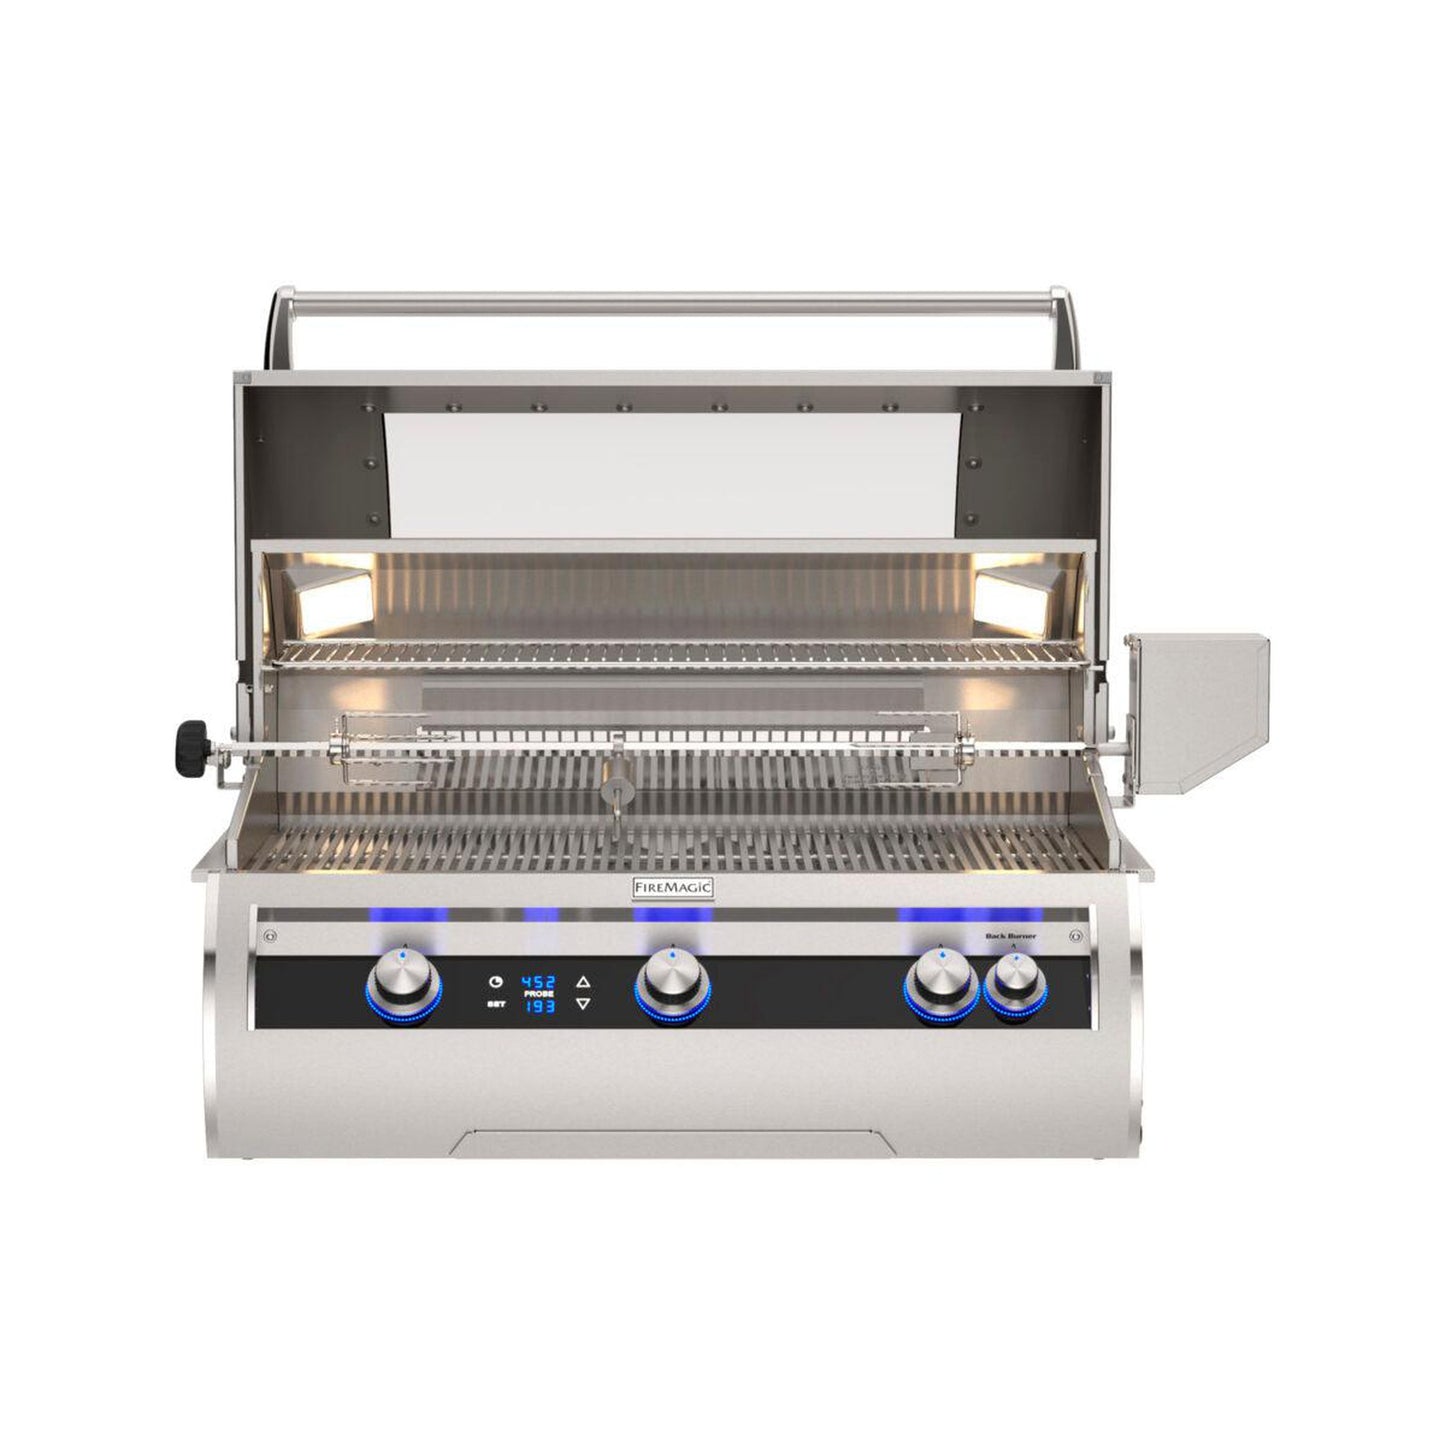 Fire Magic Echelon Diamond E790i 36" 3-Burner Built-In Gas Grill With Digital Thermometer and Optional Magic View Window